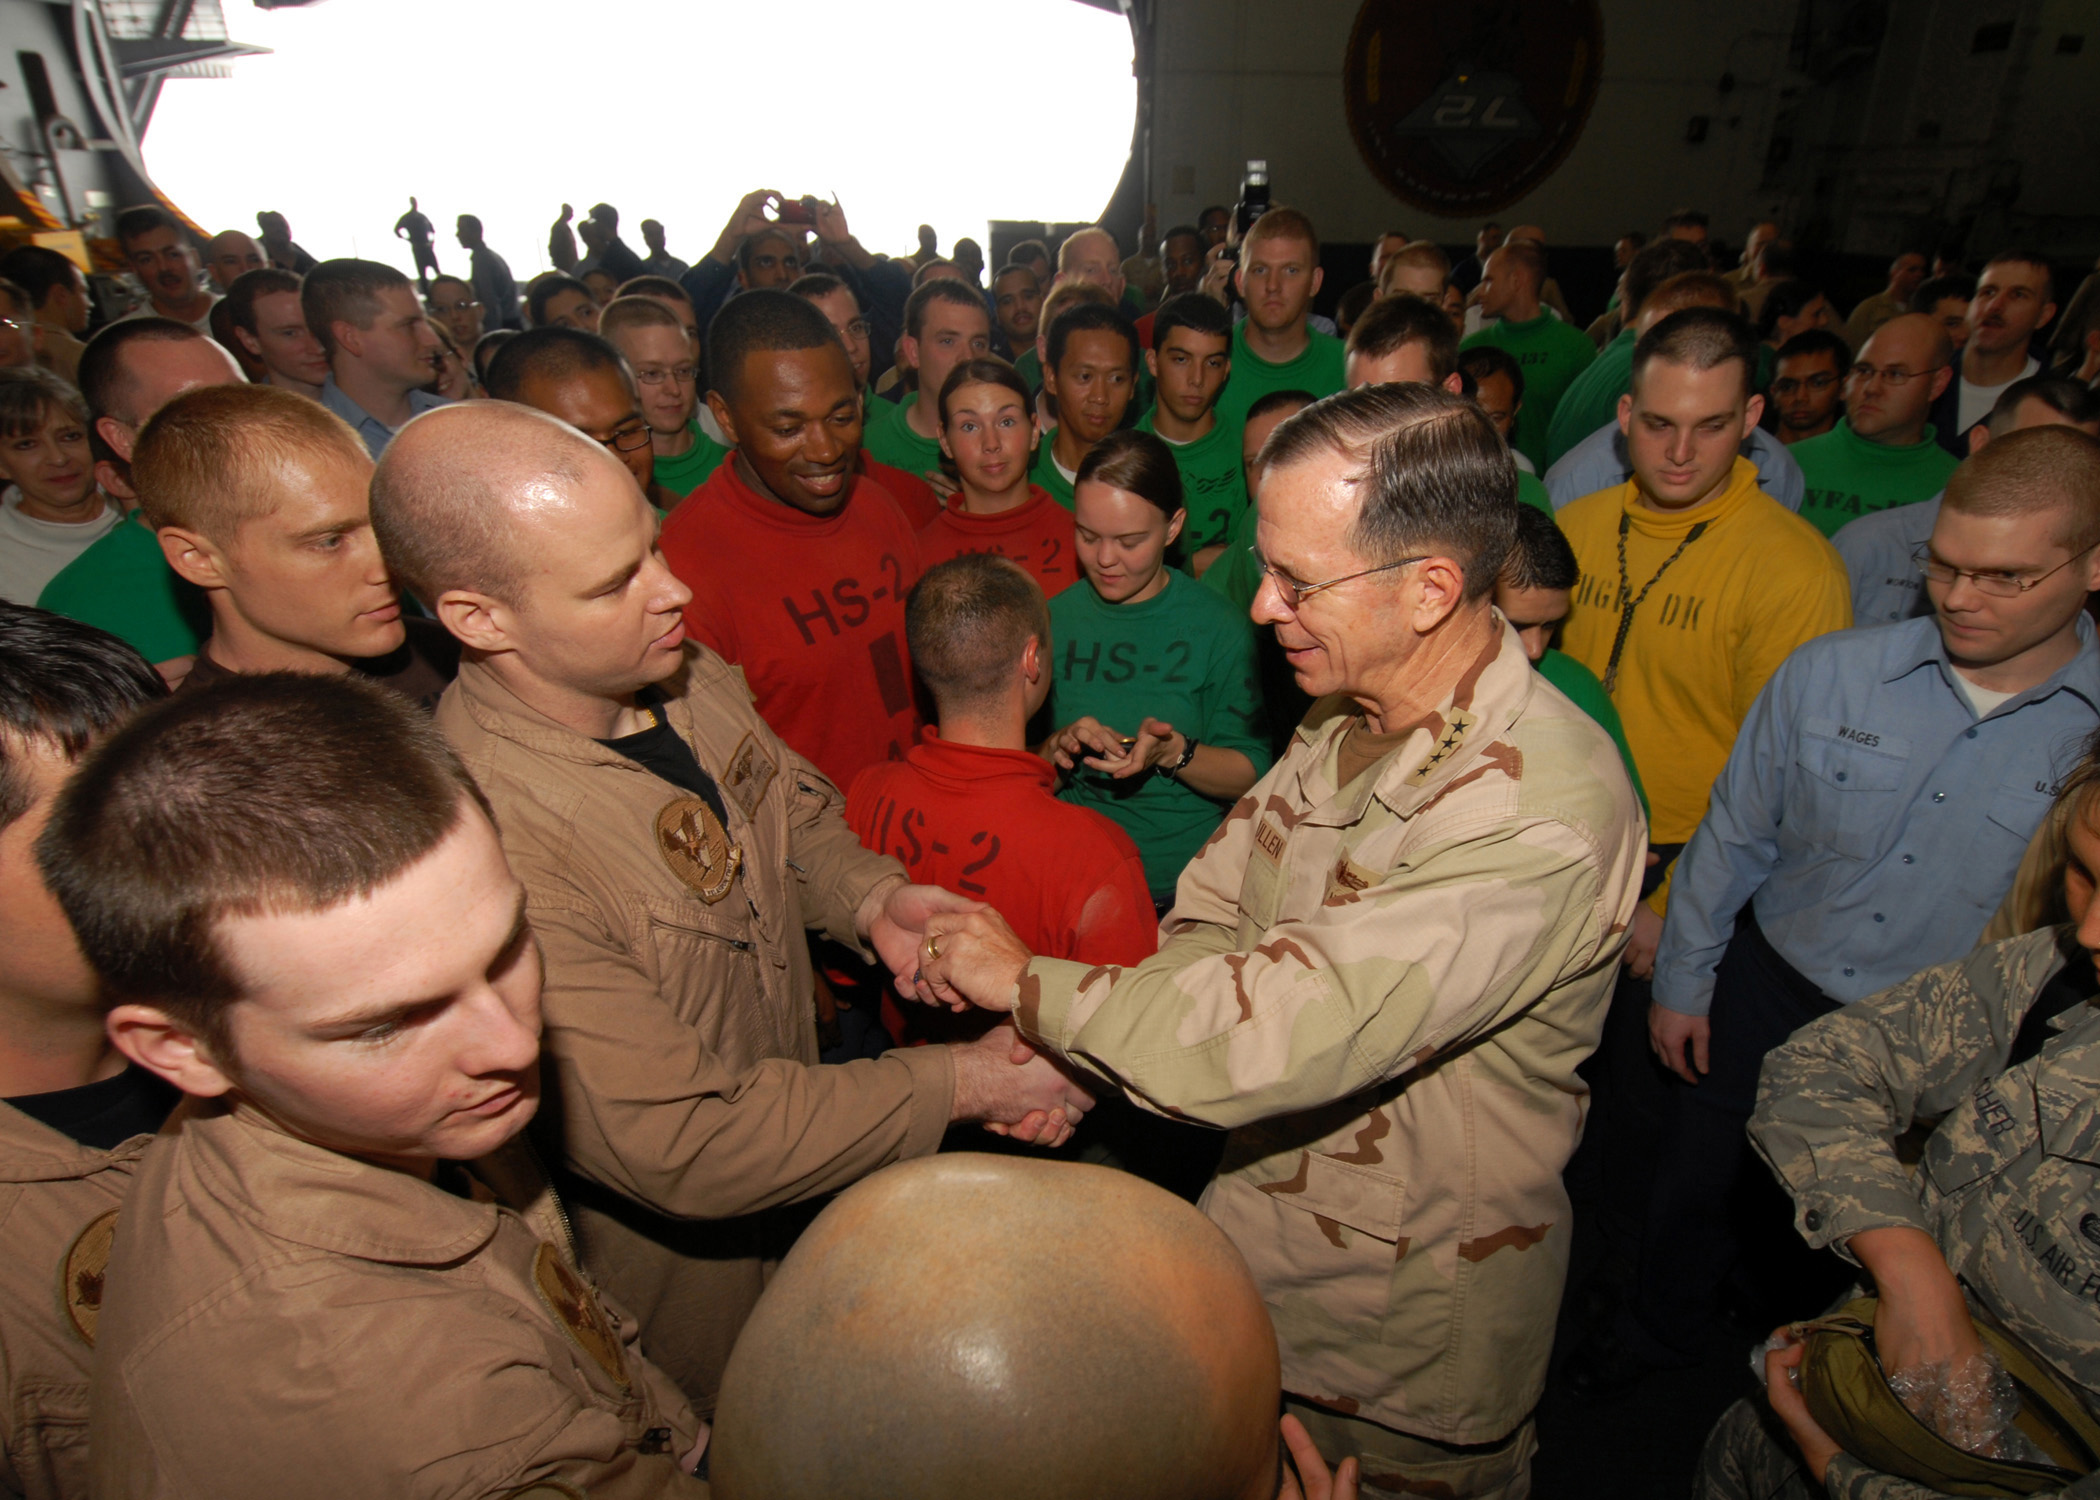 US Navy 080827-N-9079D-032 Chairman, Joint Chiefs of Staff Adm. Mike Mullen meets with Sailors in the hangar bay of the aircraft carrier USS Abraham Lincoln (CVN 72)